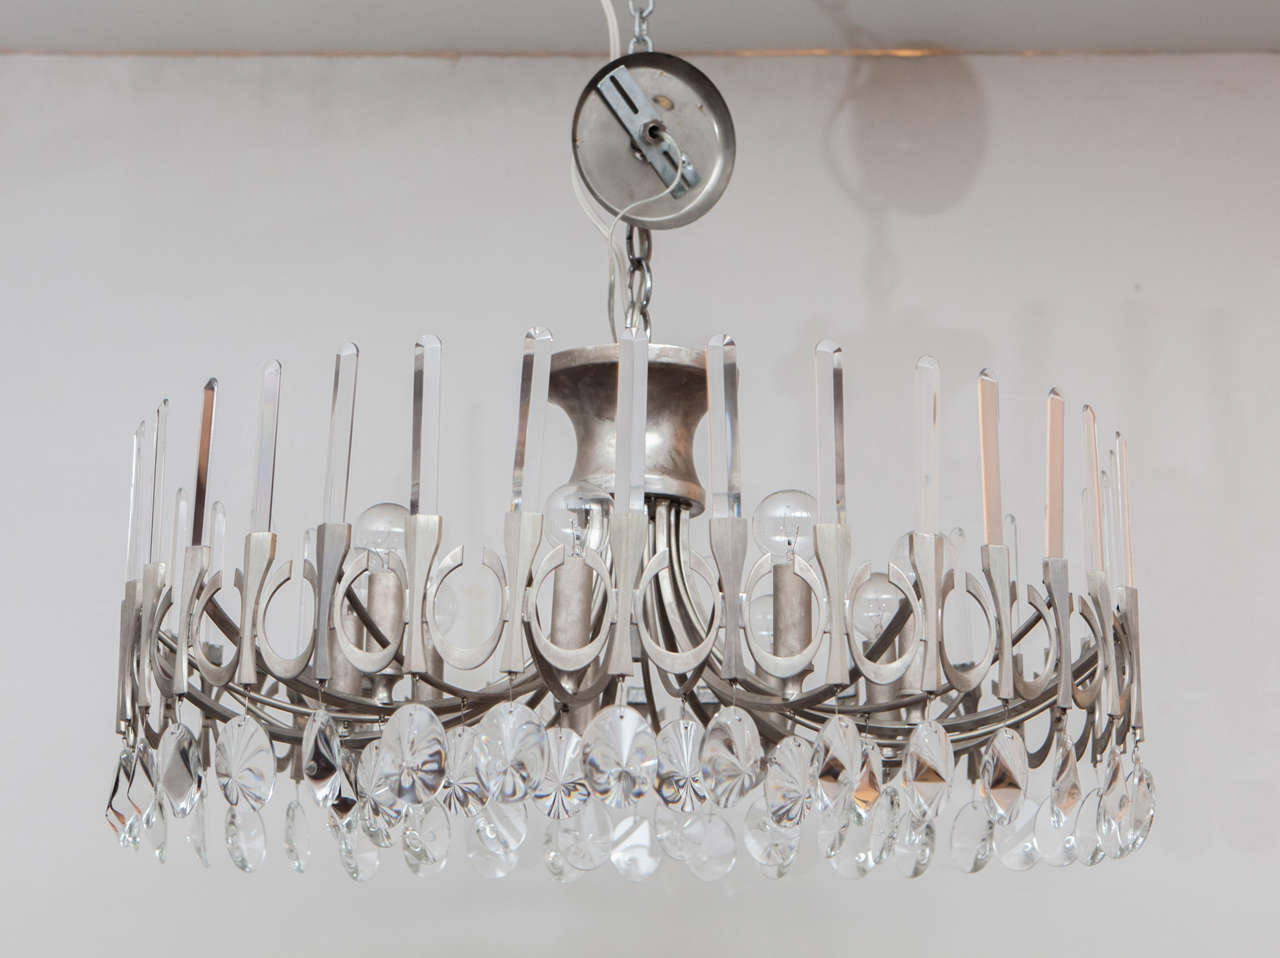 Large silver plate and crystal chandelier by Sciolari. The chandelier retains a light silver patina overall, but could be polished to a high sheen.